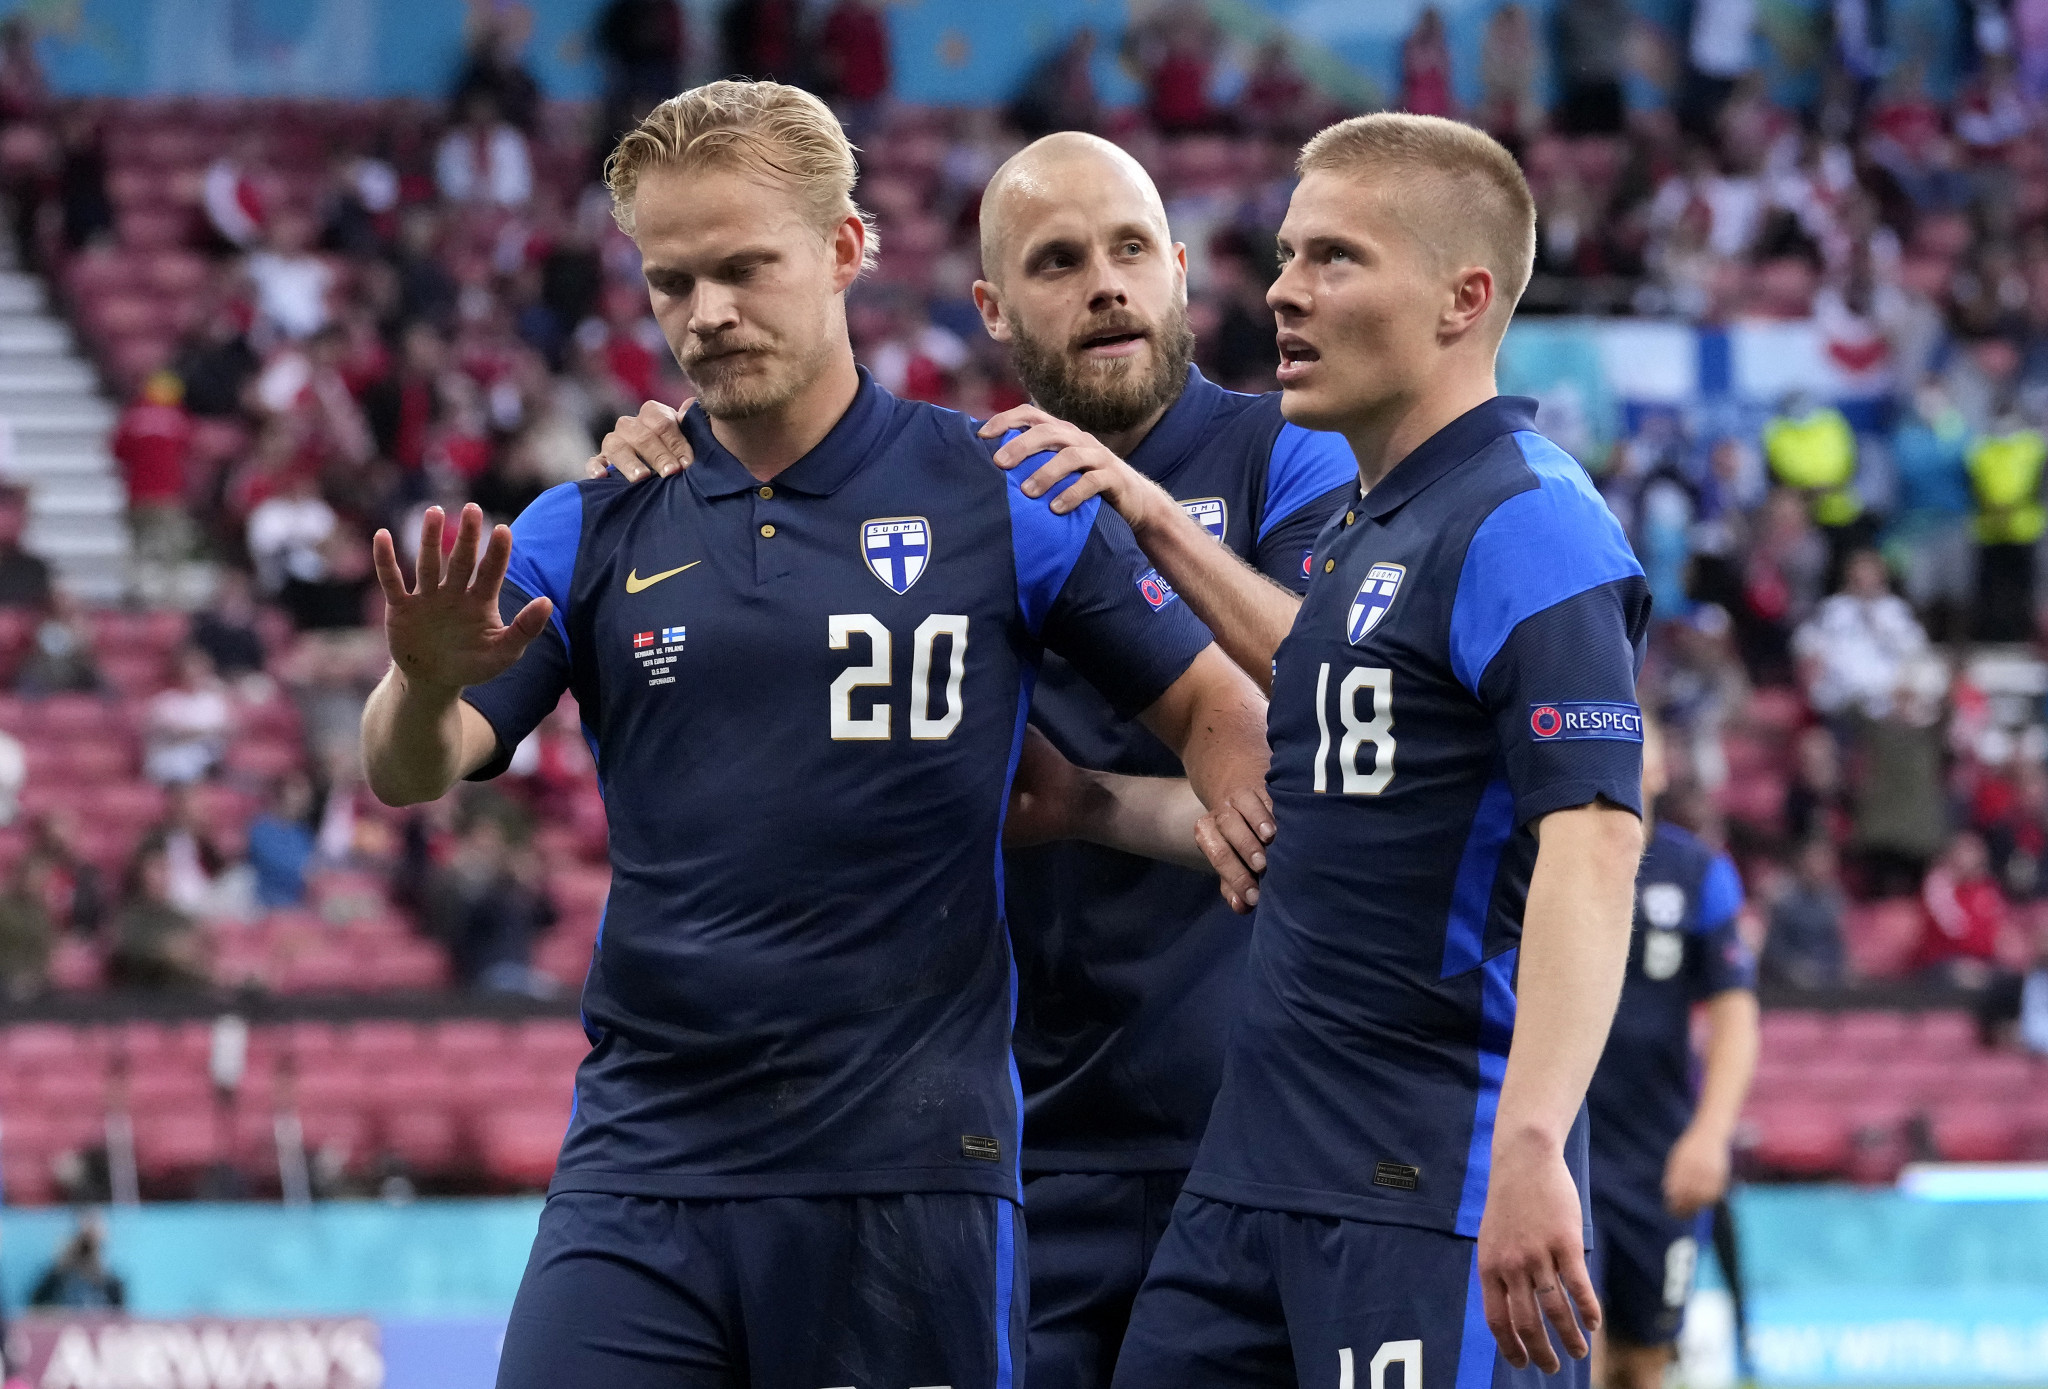 Joel Pohjanpalo did not celebrate after scoring against Denmark at Euro 2020, out of respect for midfielder Christian Eriksen, who had collapsed earlier in the game ©Getty Images